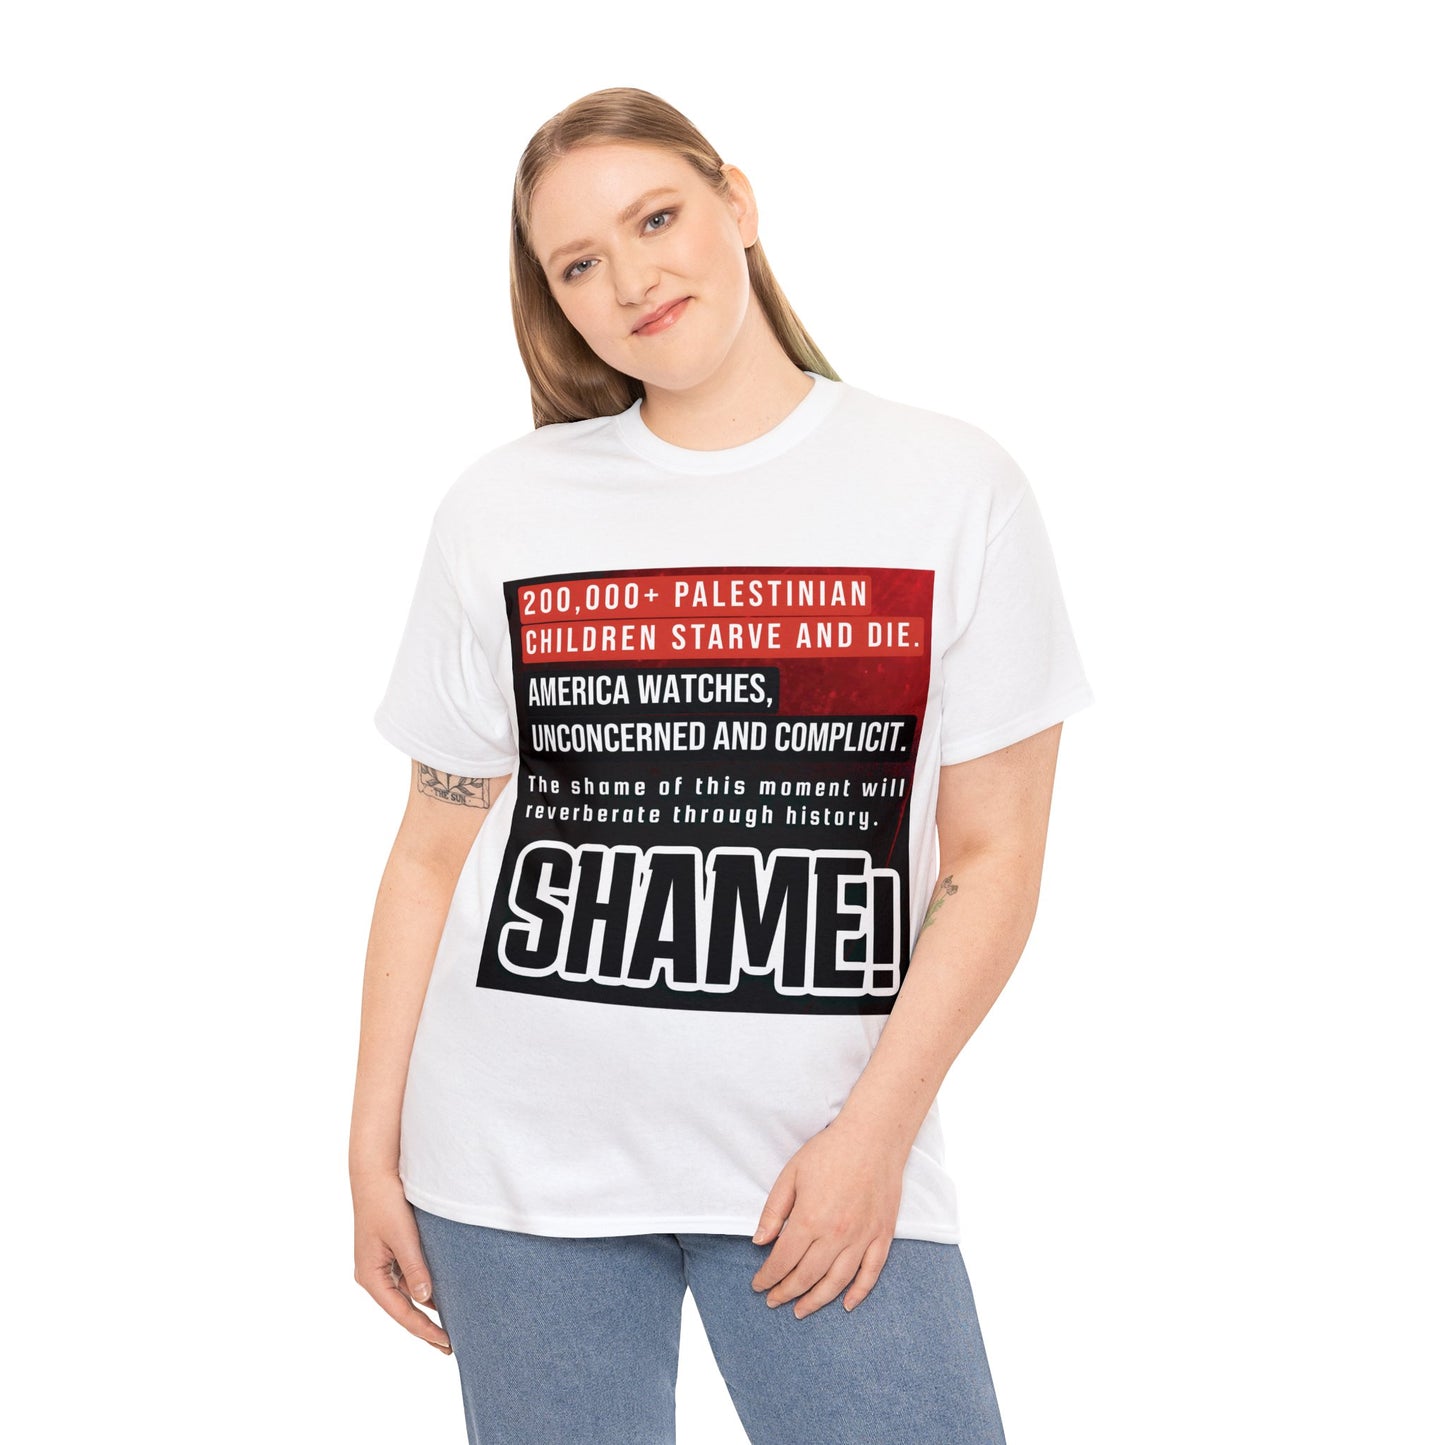 T-SHIRT: USA SHAME - Unisex Heavy Cotton Tee - Express shipping available